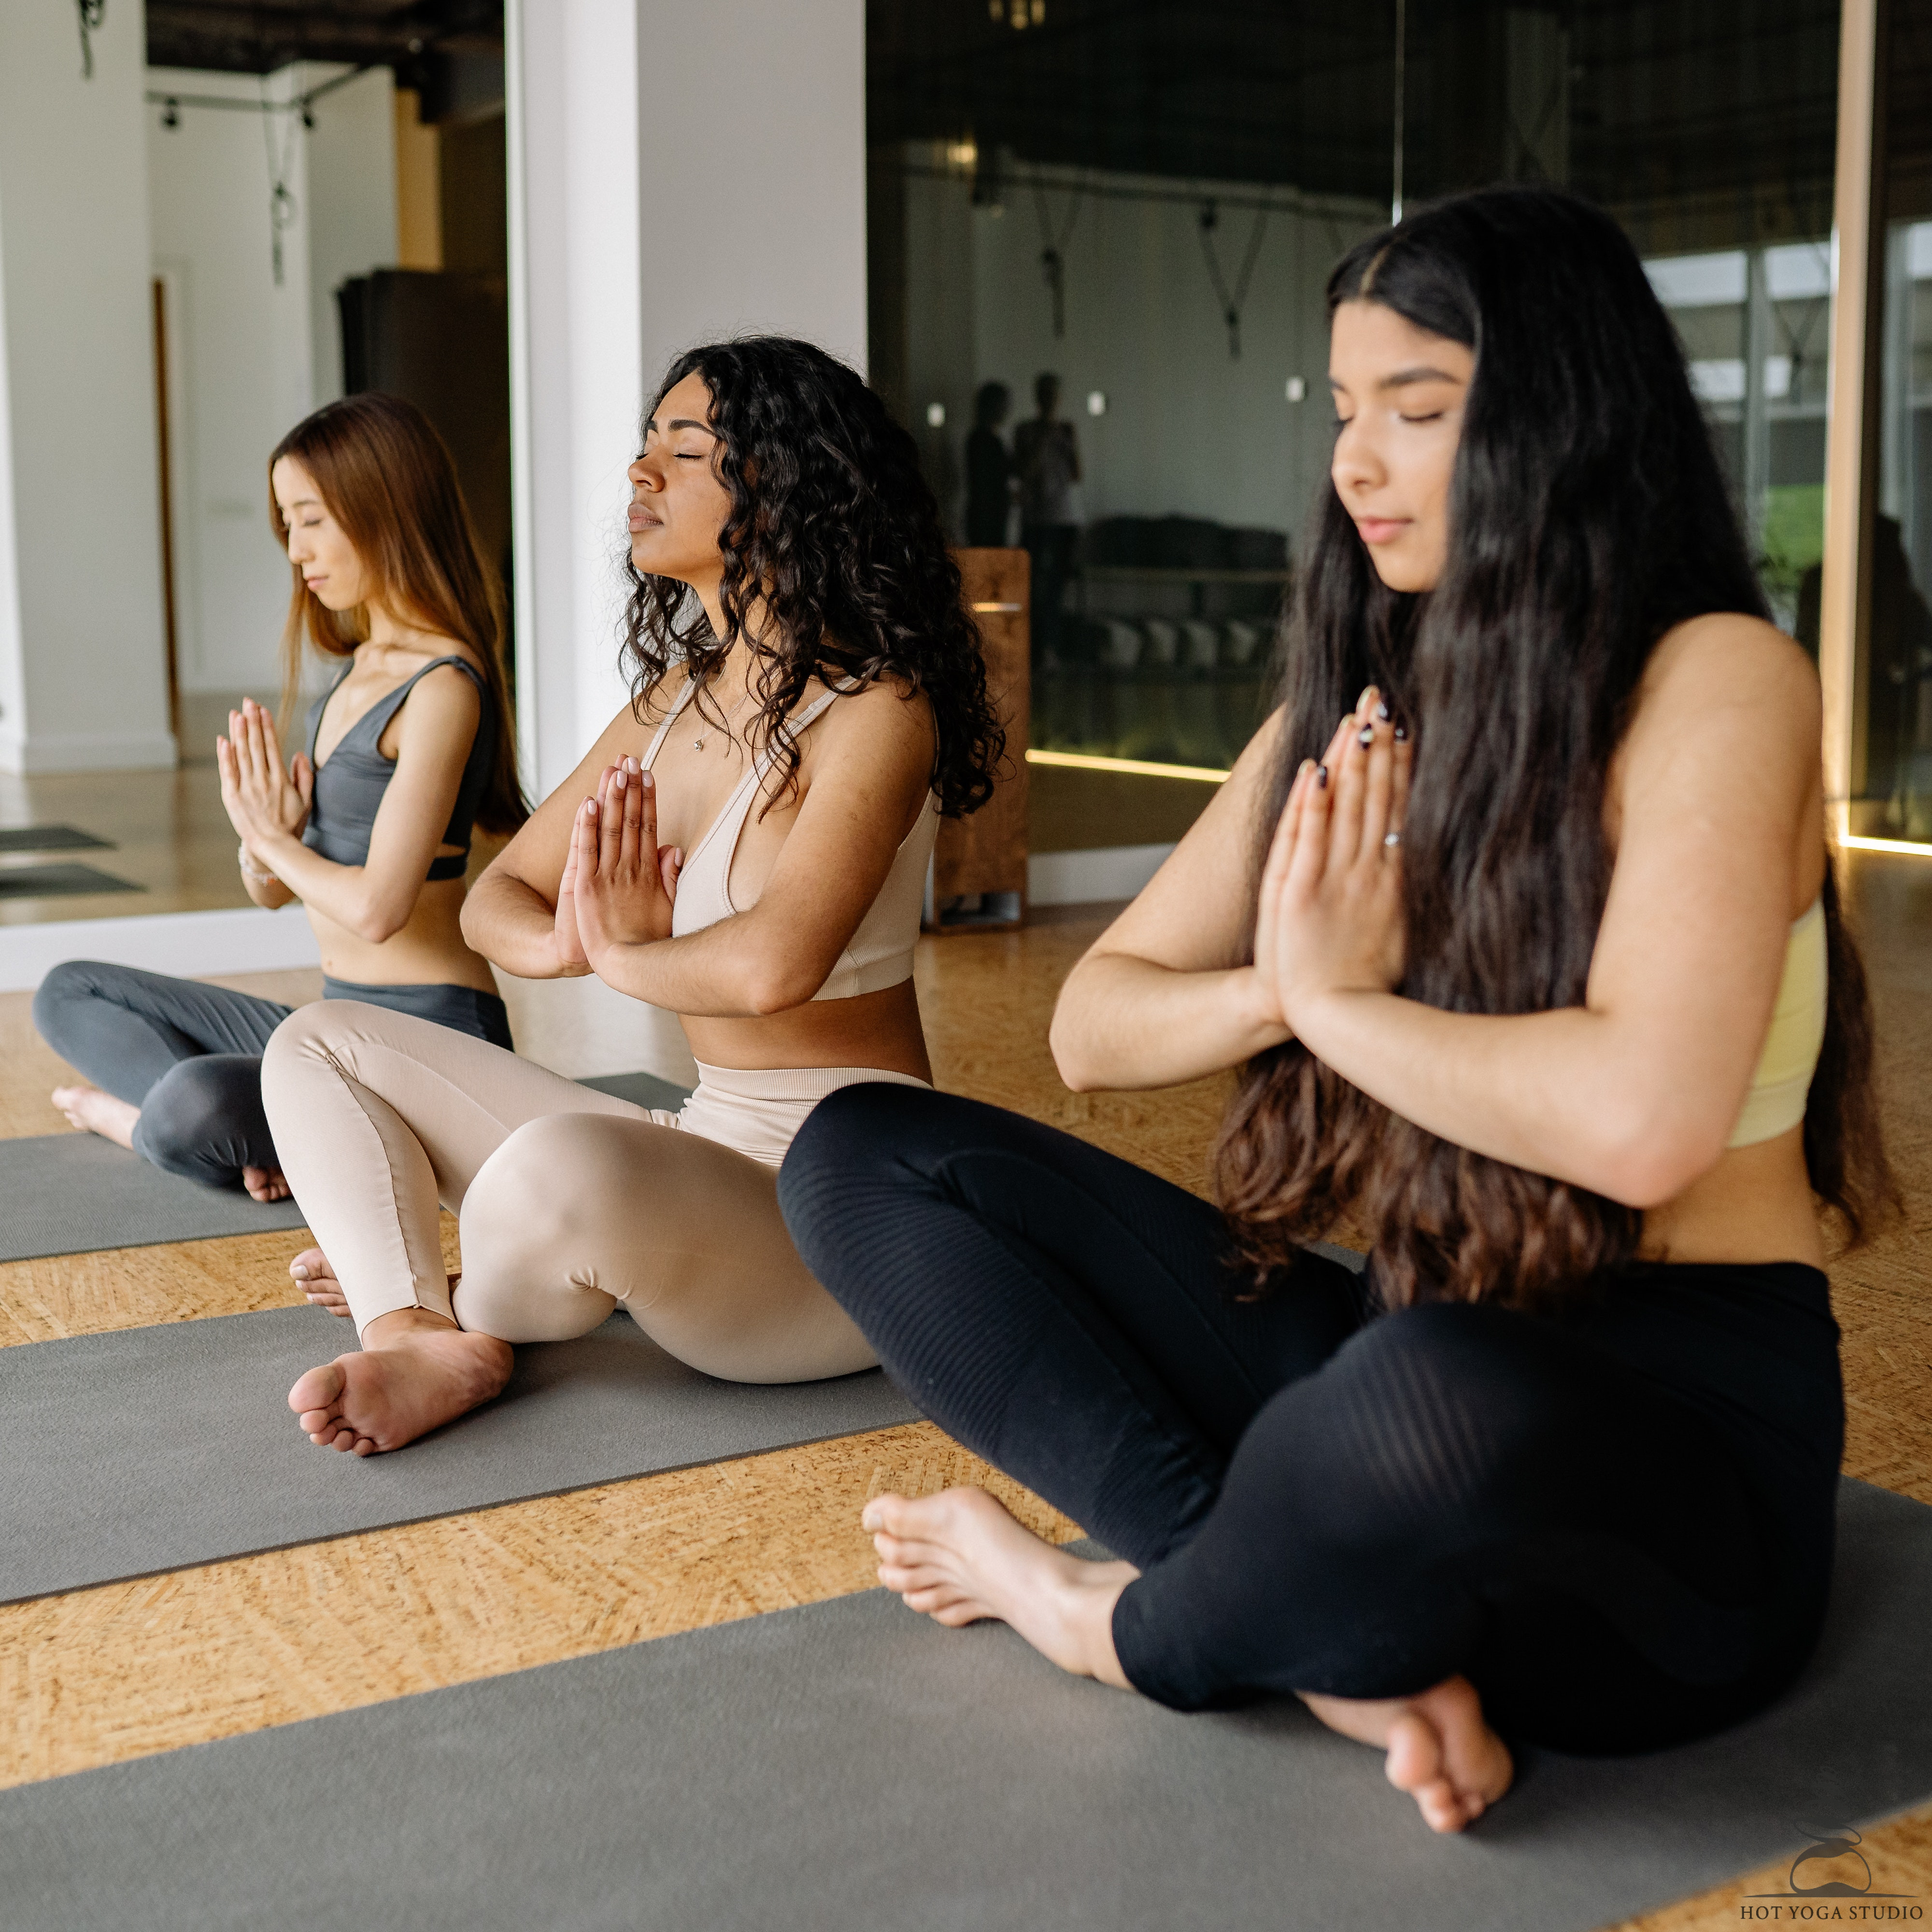 5 Ways to Deal with Negative Yoga Teachers